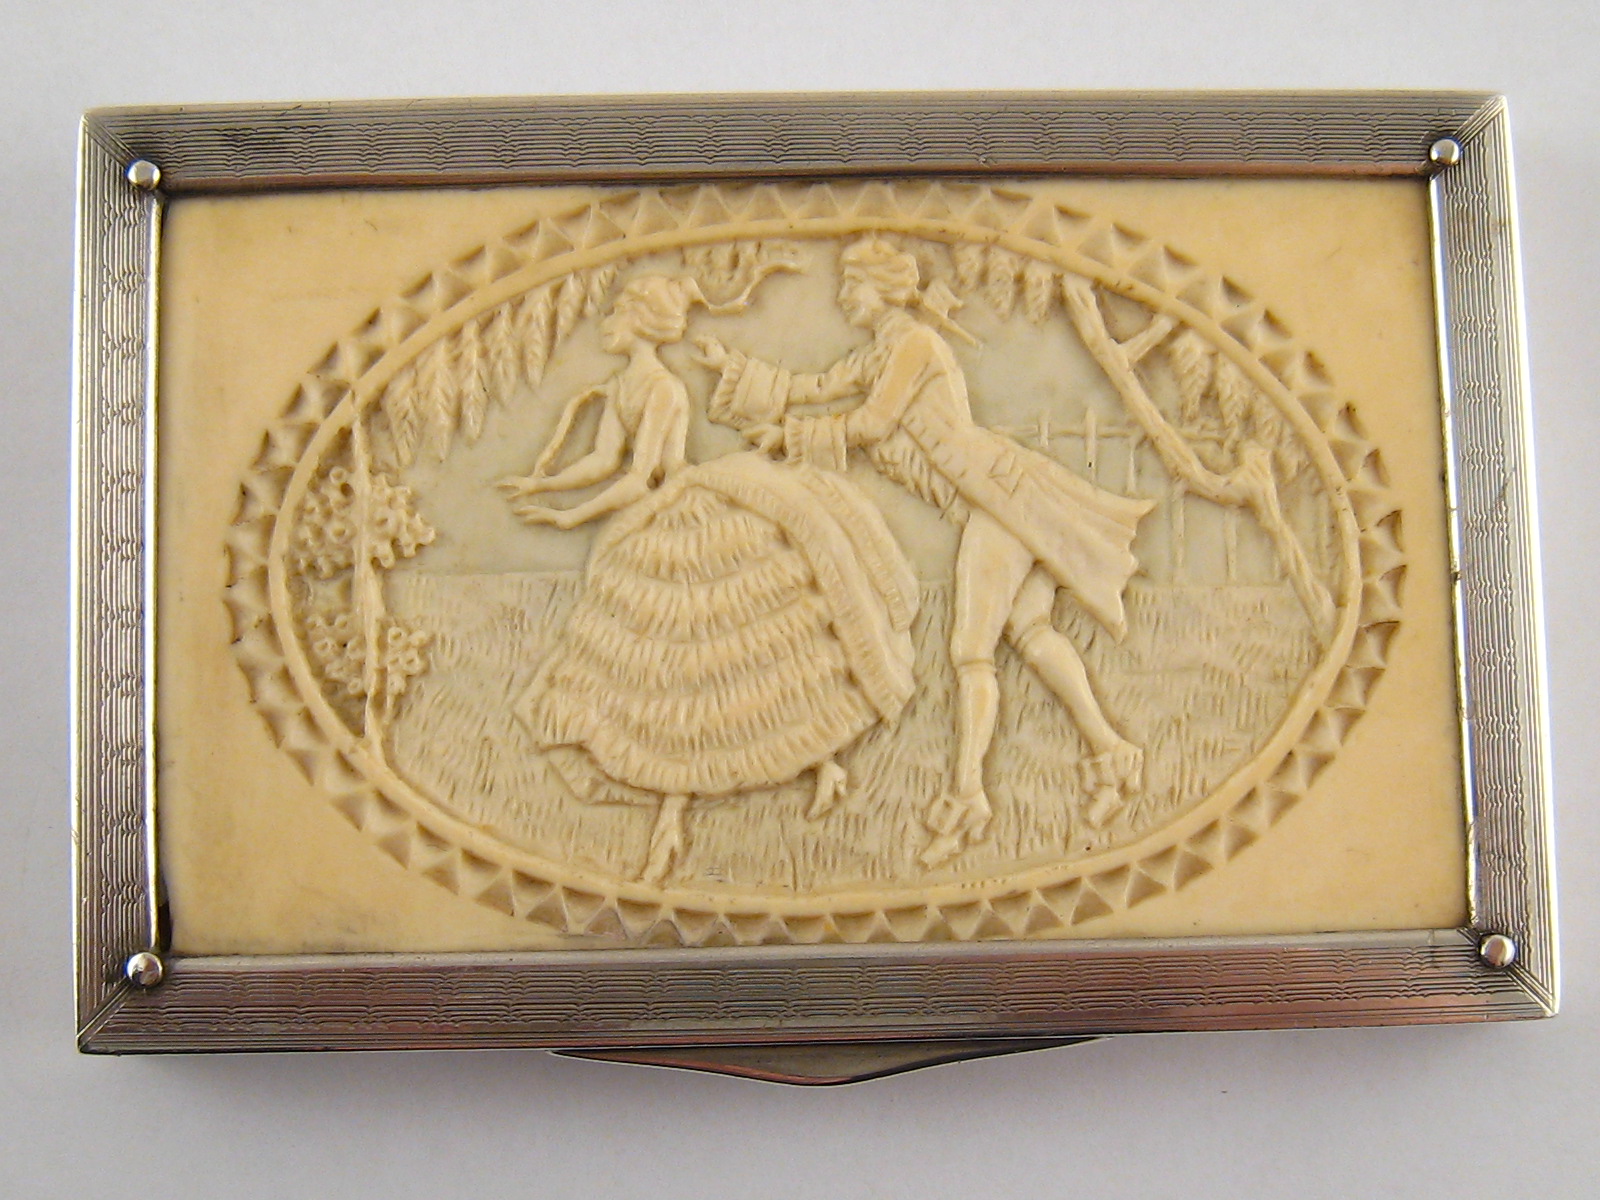 An Austrian silver, 935 standard, rectangular box, the lid an inset ivory panel with fine oval